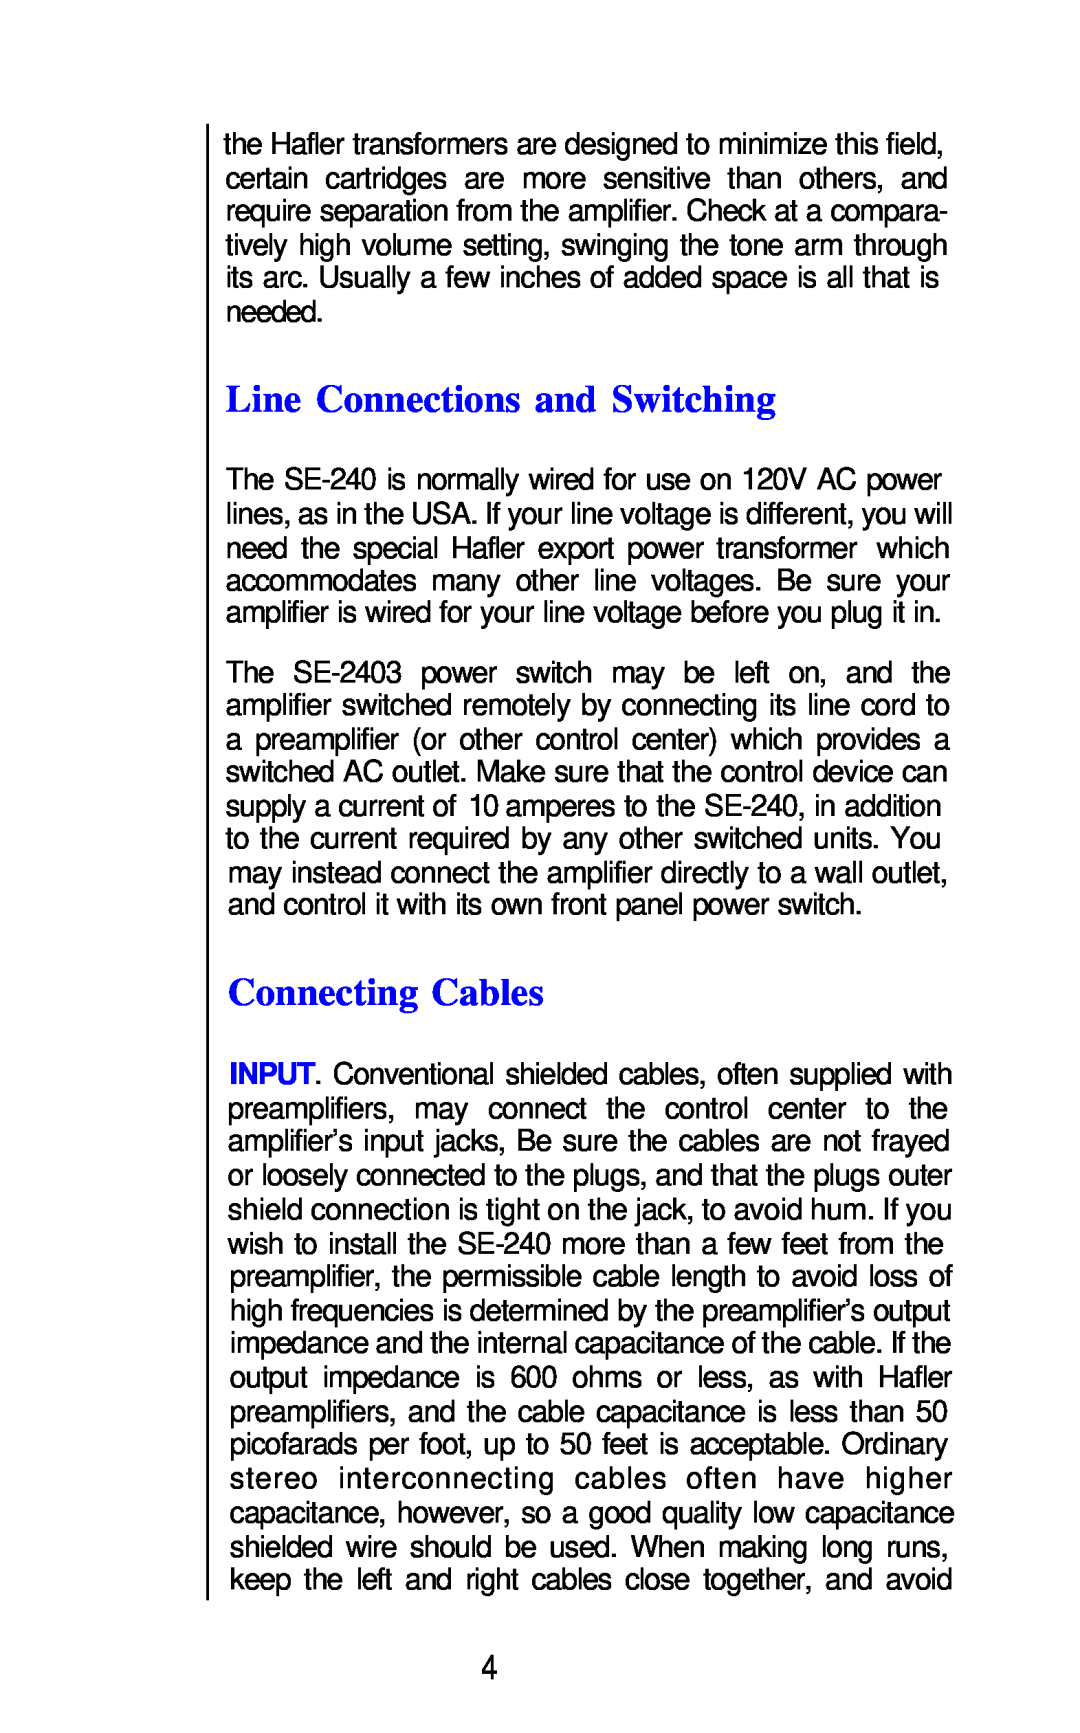 Hafler SE240 owner manual Line Connections and Switching, Connecting Cables 